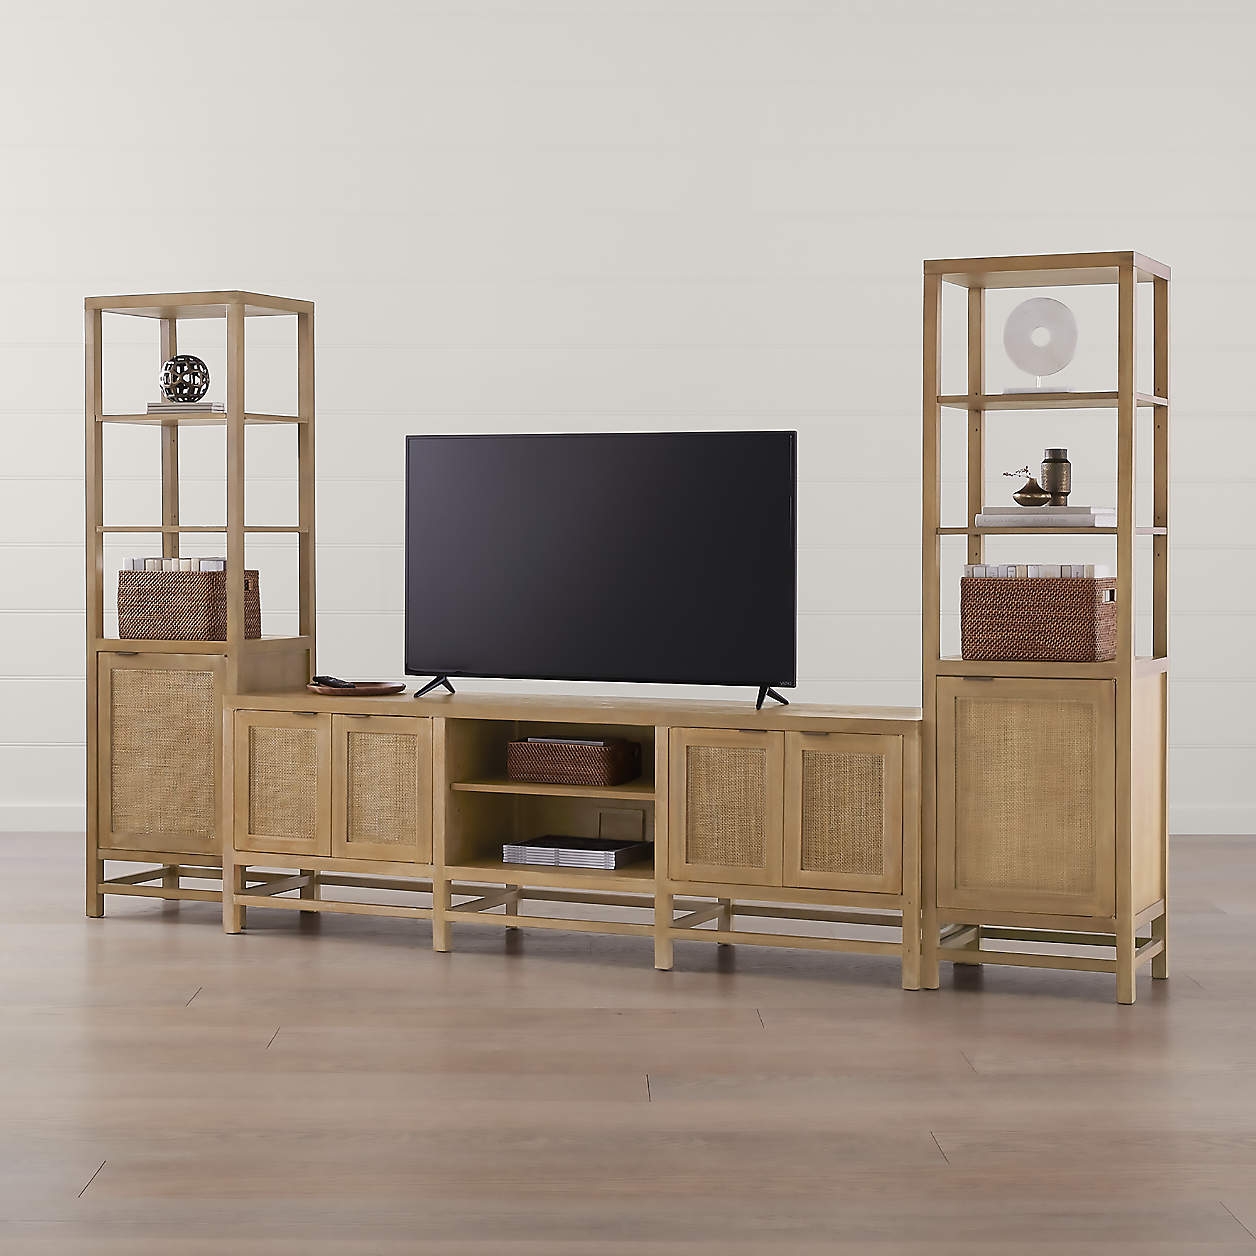 Blake 85" Light Brown Teak and Rattan Storage Media Console with 2 Tall Cabinets - Image 1